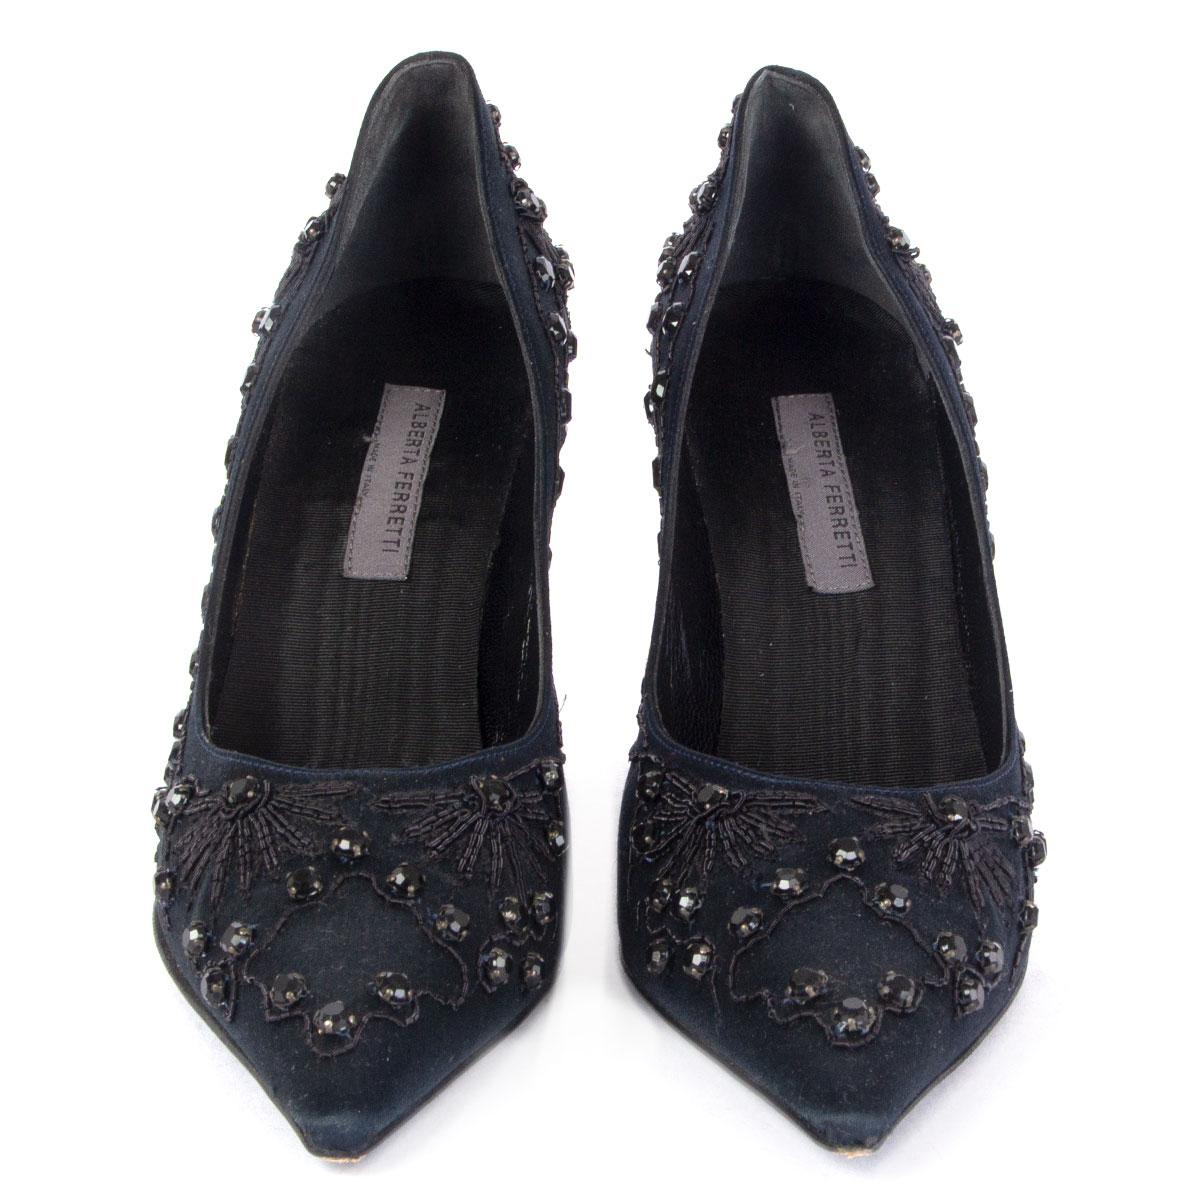 100% authentic Alberta Ferretti pumps in midnight blue satin, embellished with black rhinestones. Have been worn and are in excellent condition. 

Measurements
Imprinted Size	38
Shoe Size	38
Inside Sole	25cm (9.8in)
Width	7.5cm (2.9in)
Heel	9cm